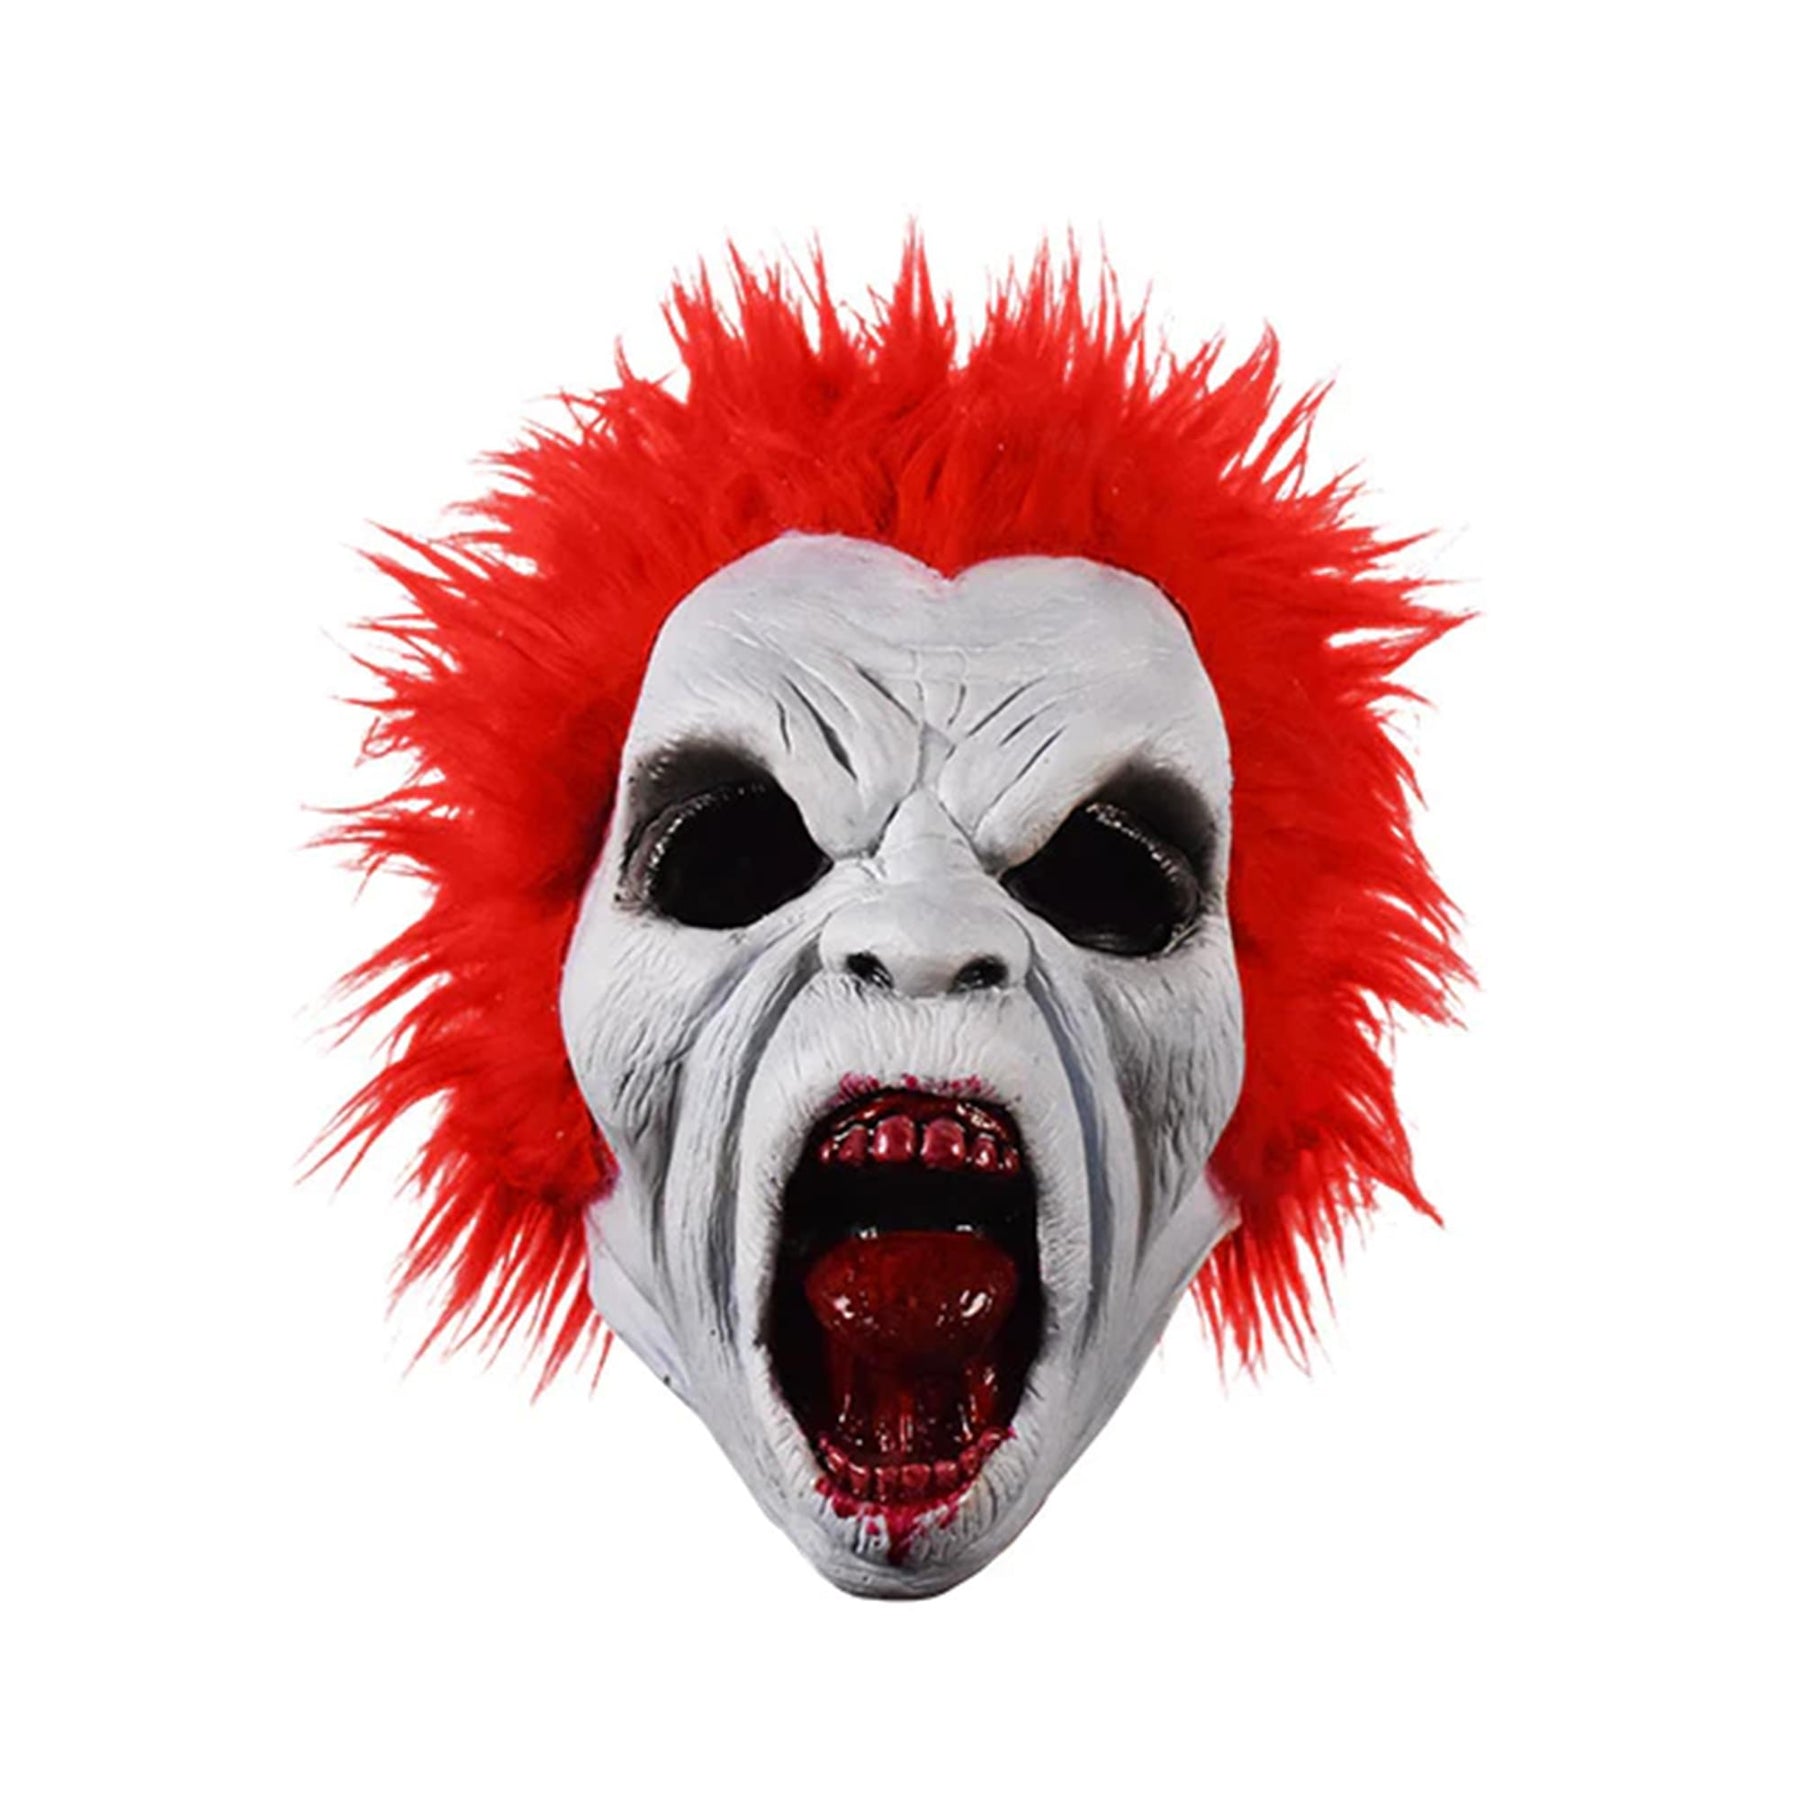 The Return of the Living Dead Trash Zombie Adult Costume Mask